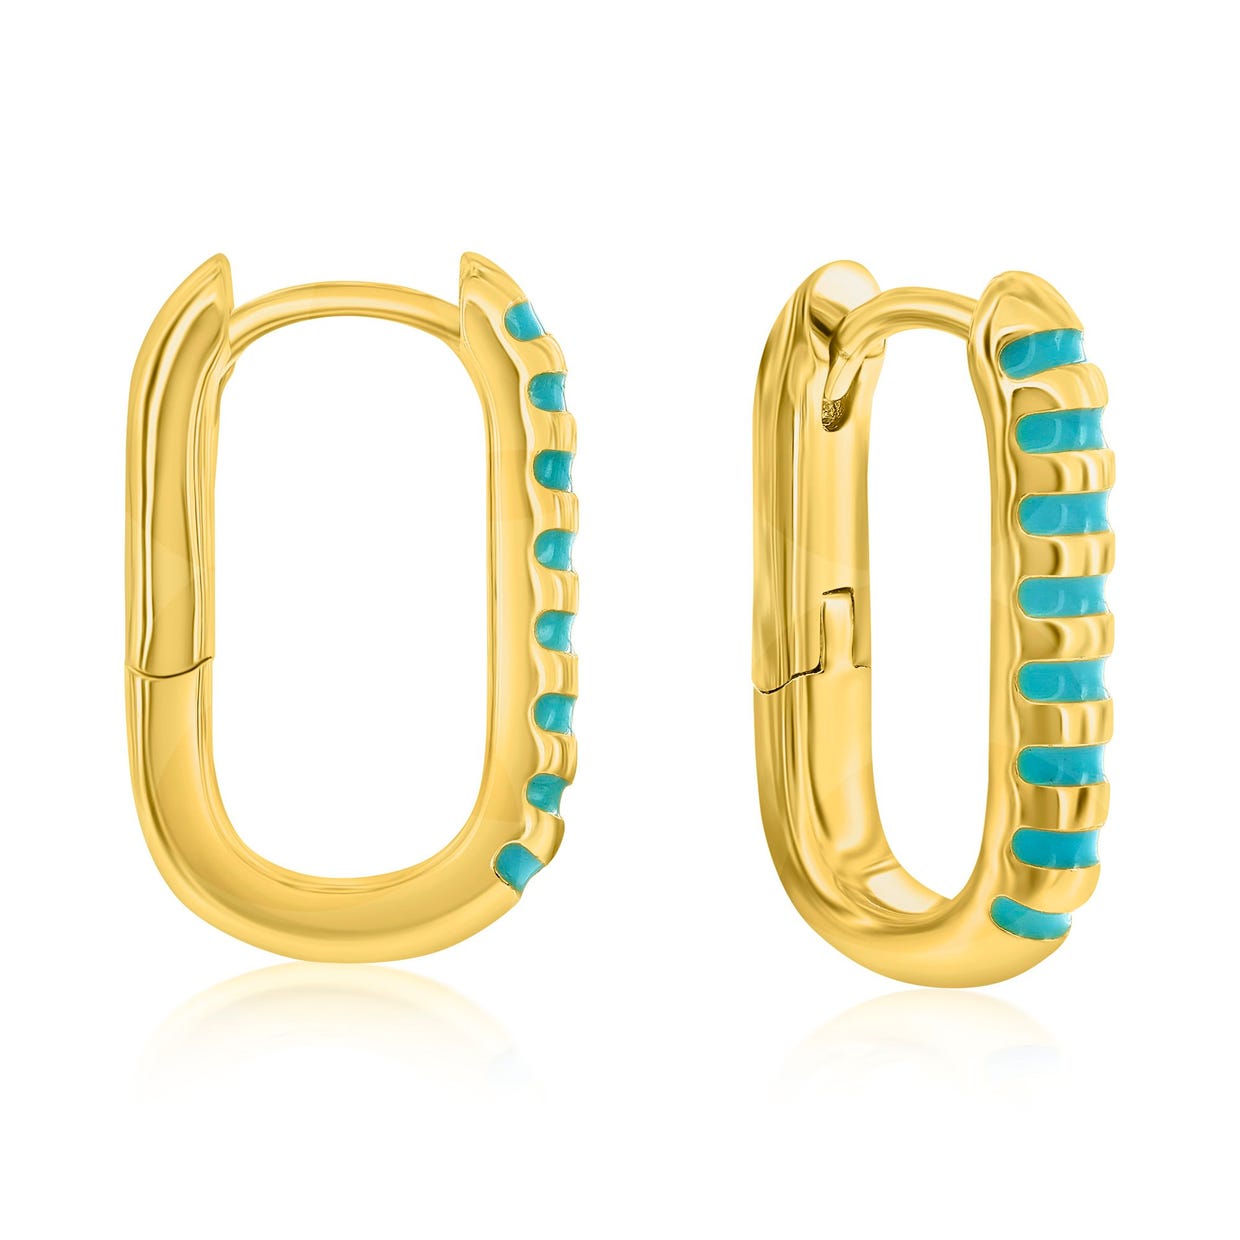 Gold hoop earrings with a row of turquoise accents along one edge.